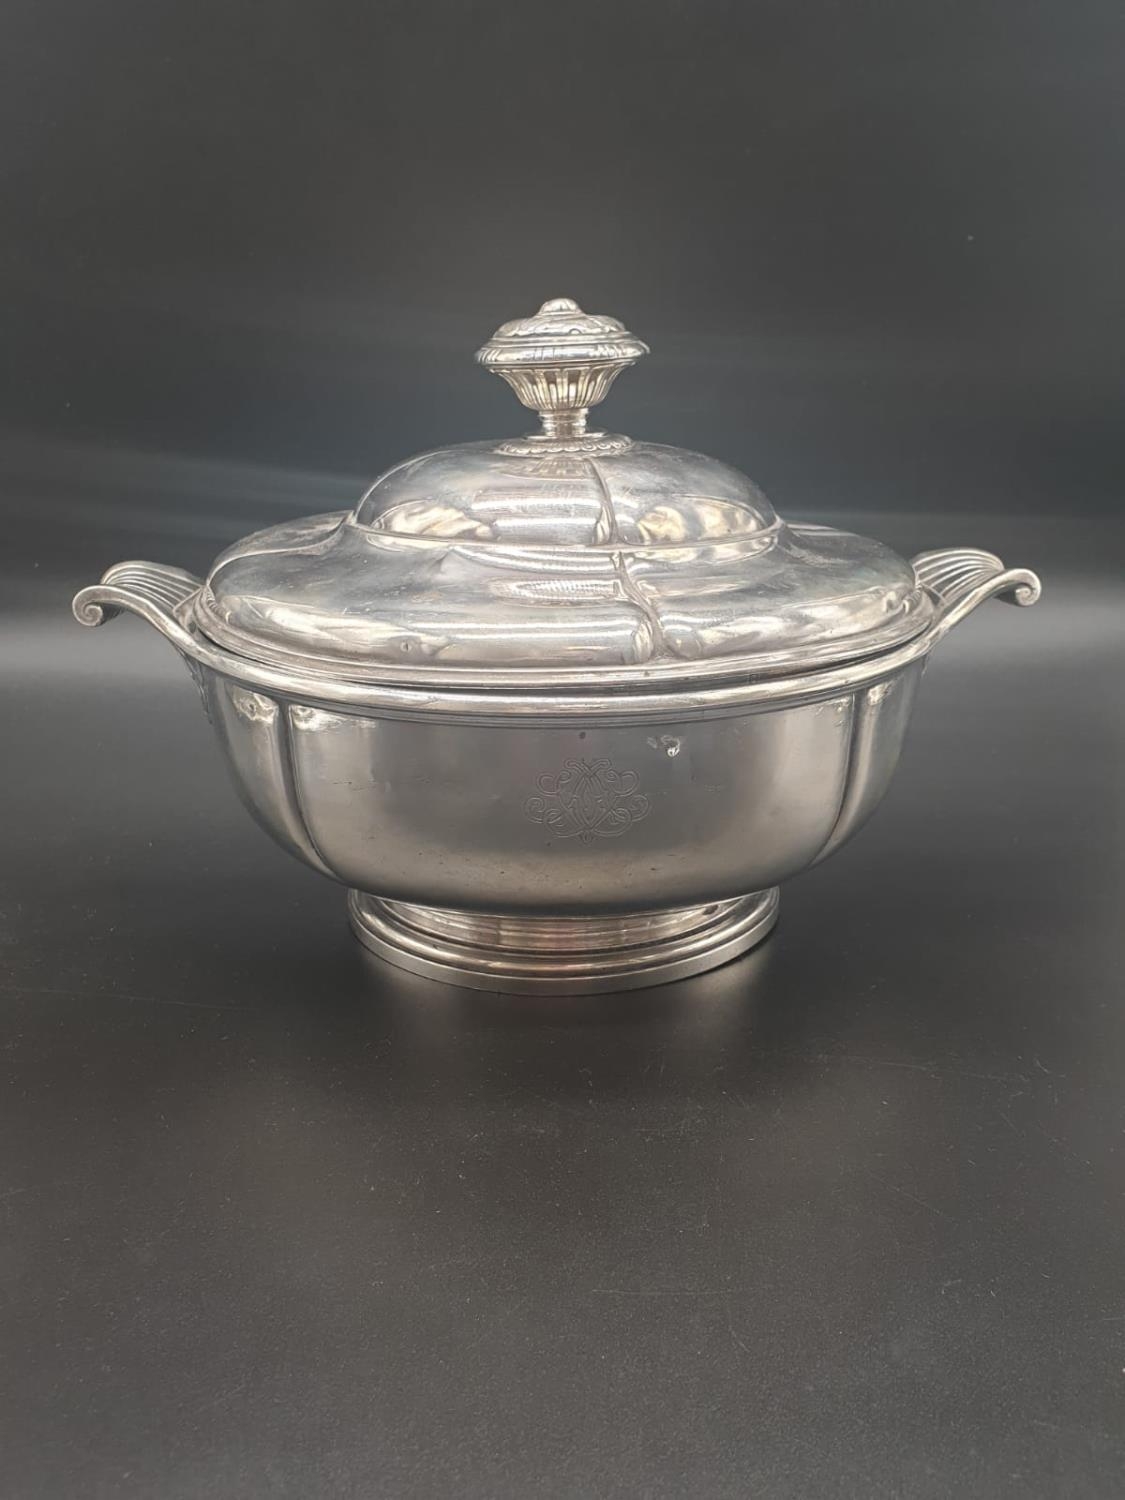 A SOLID SILVER (950 SILVER) FRENCH ENTREE TURINE MADE BY JULES RAYD IN THE 19th CENTURY. 1133gms